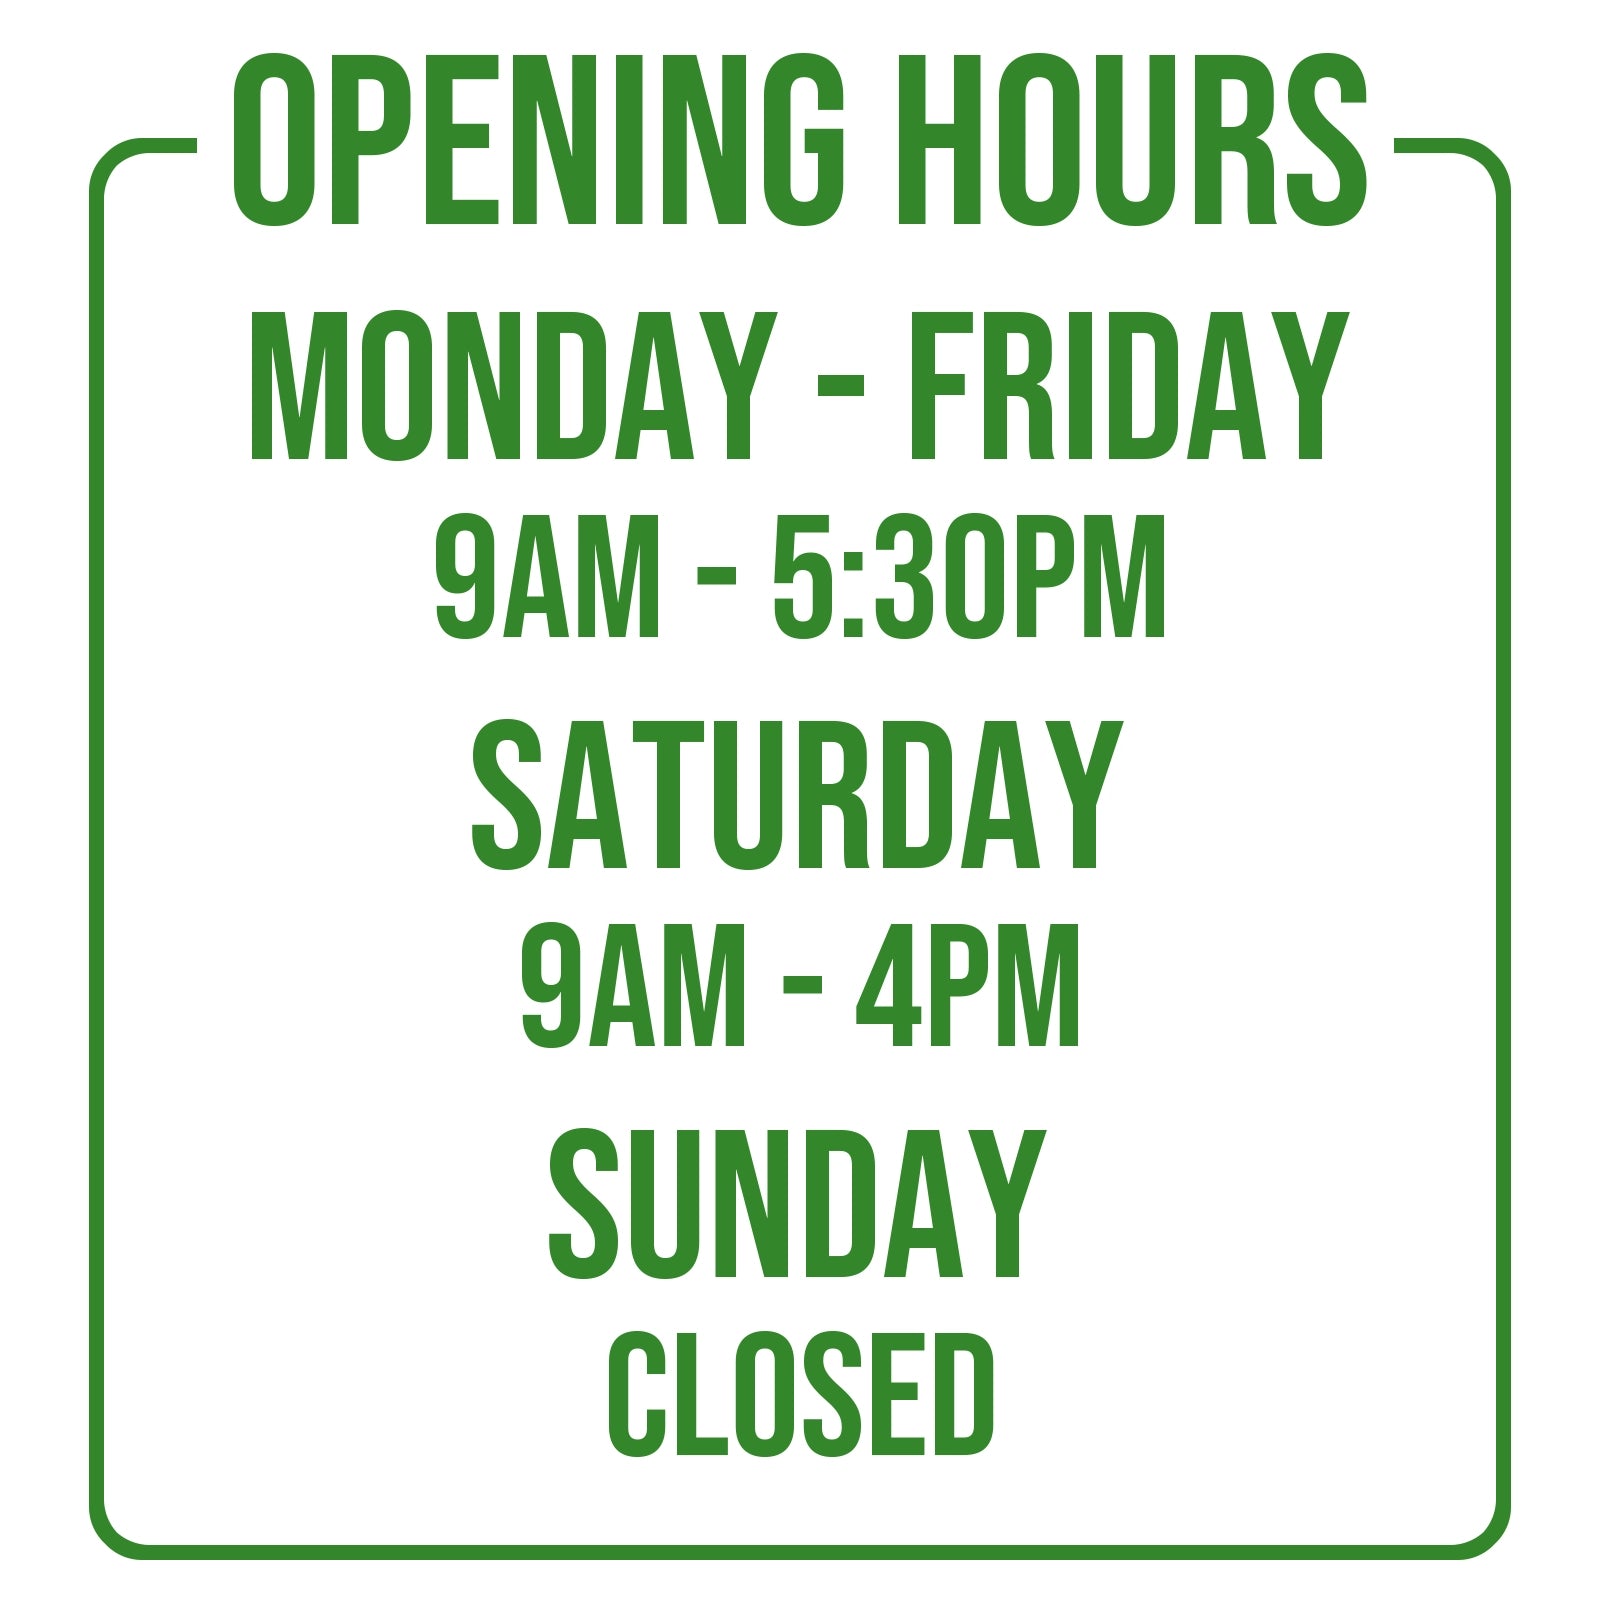 Opening Times for Shop Business Window in Dark Green